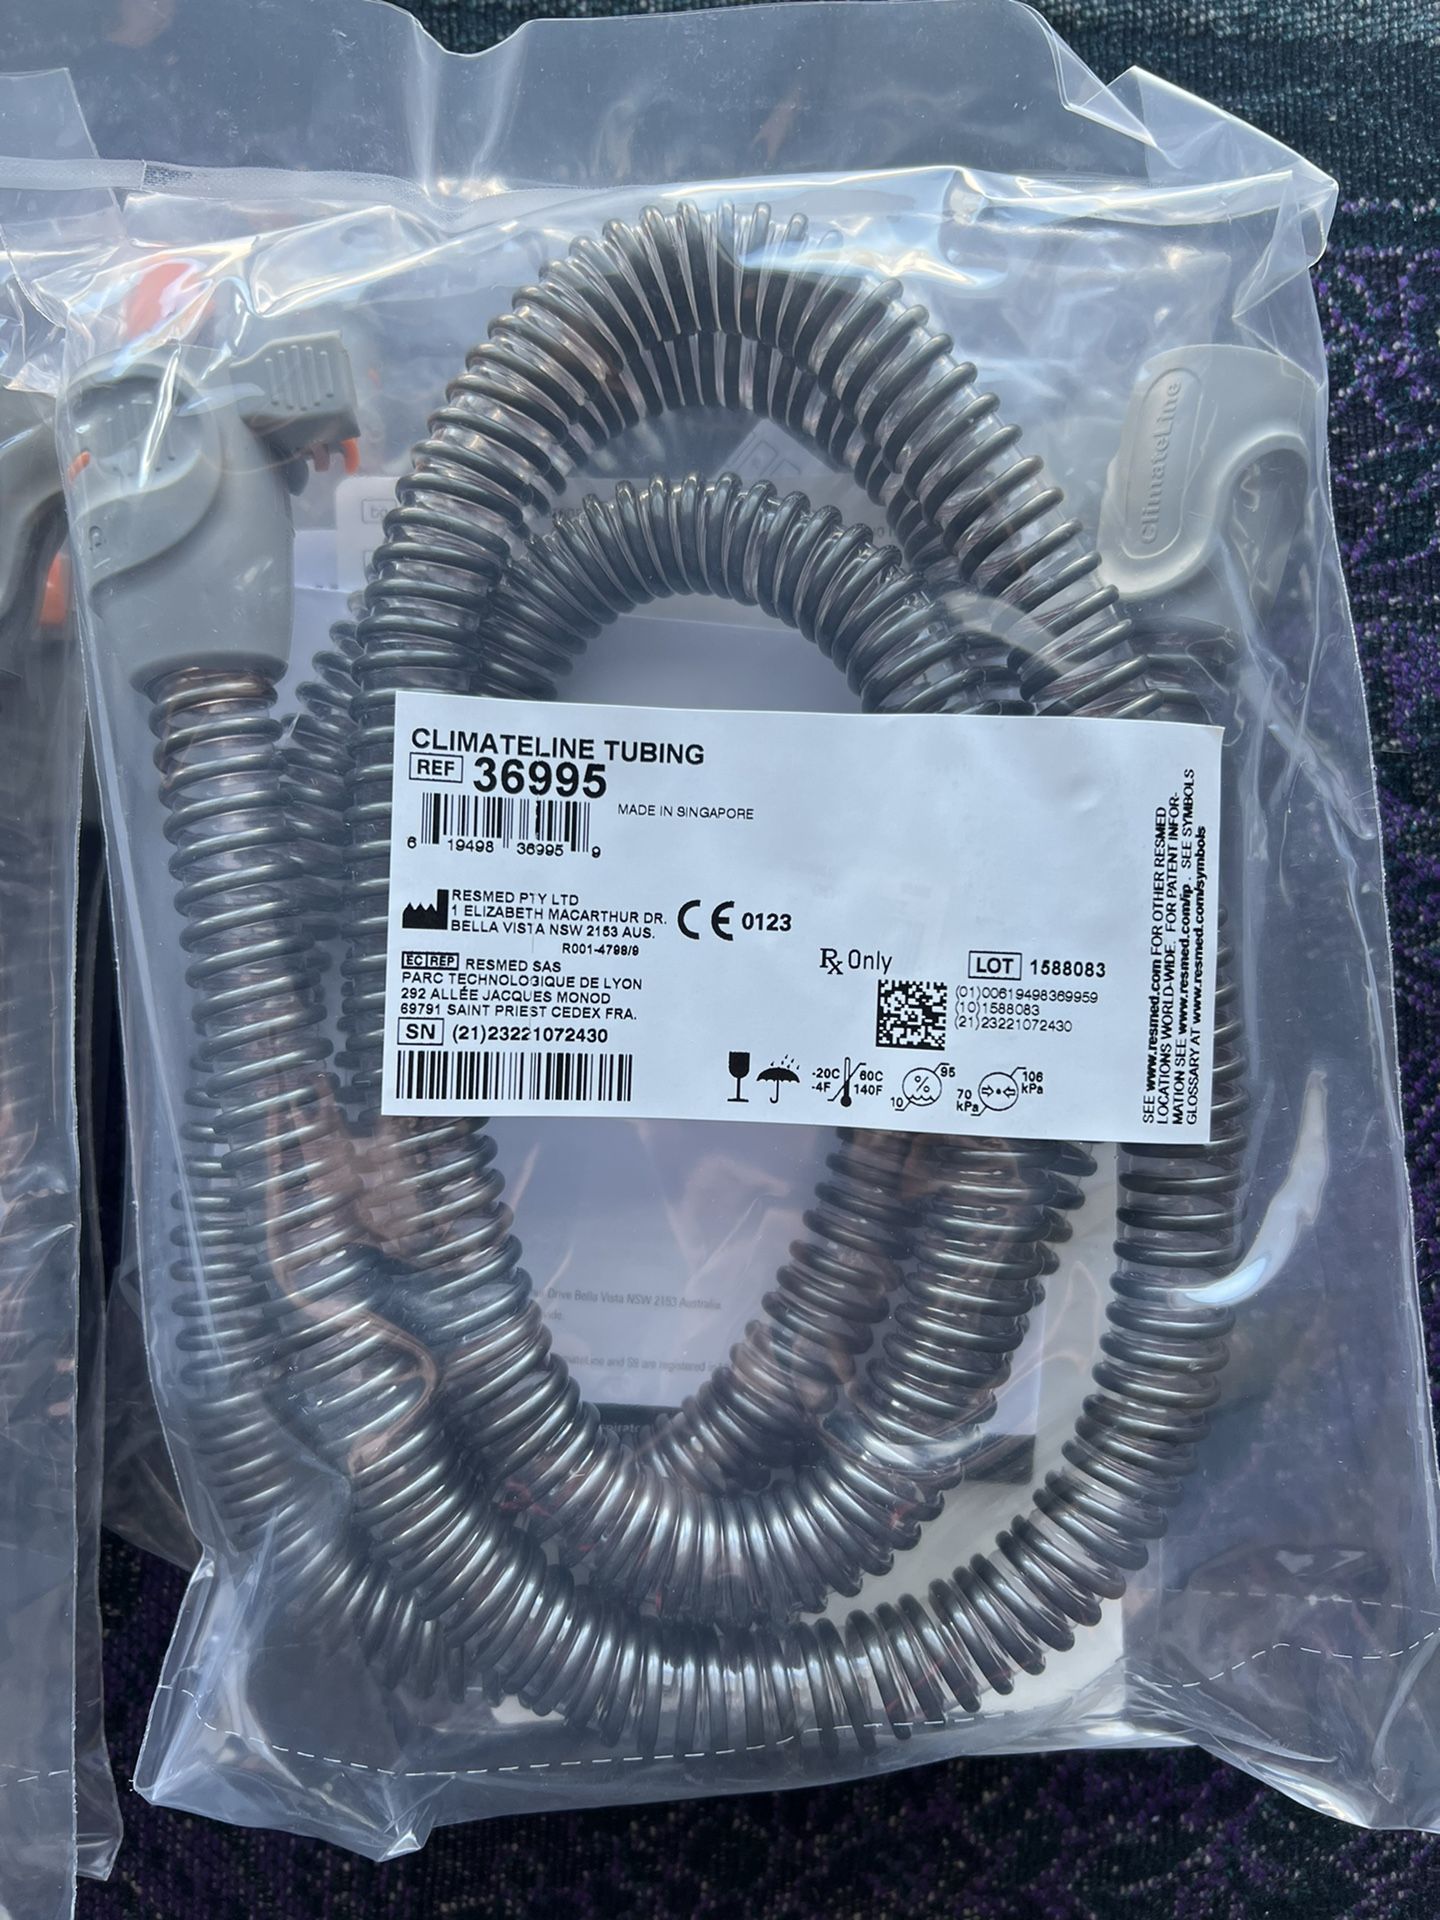 Climateline Heated Tubing For ResMed S9/S10